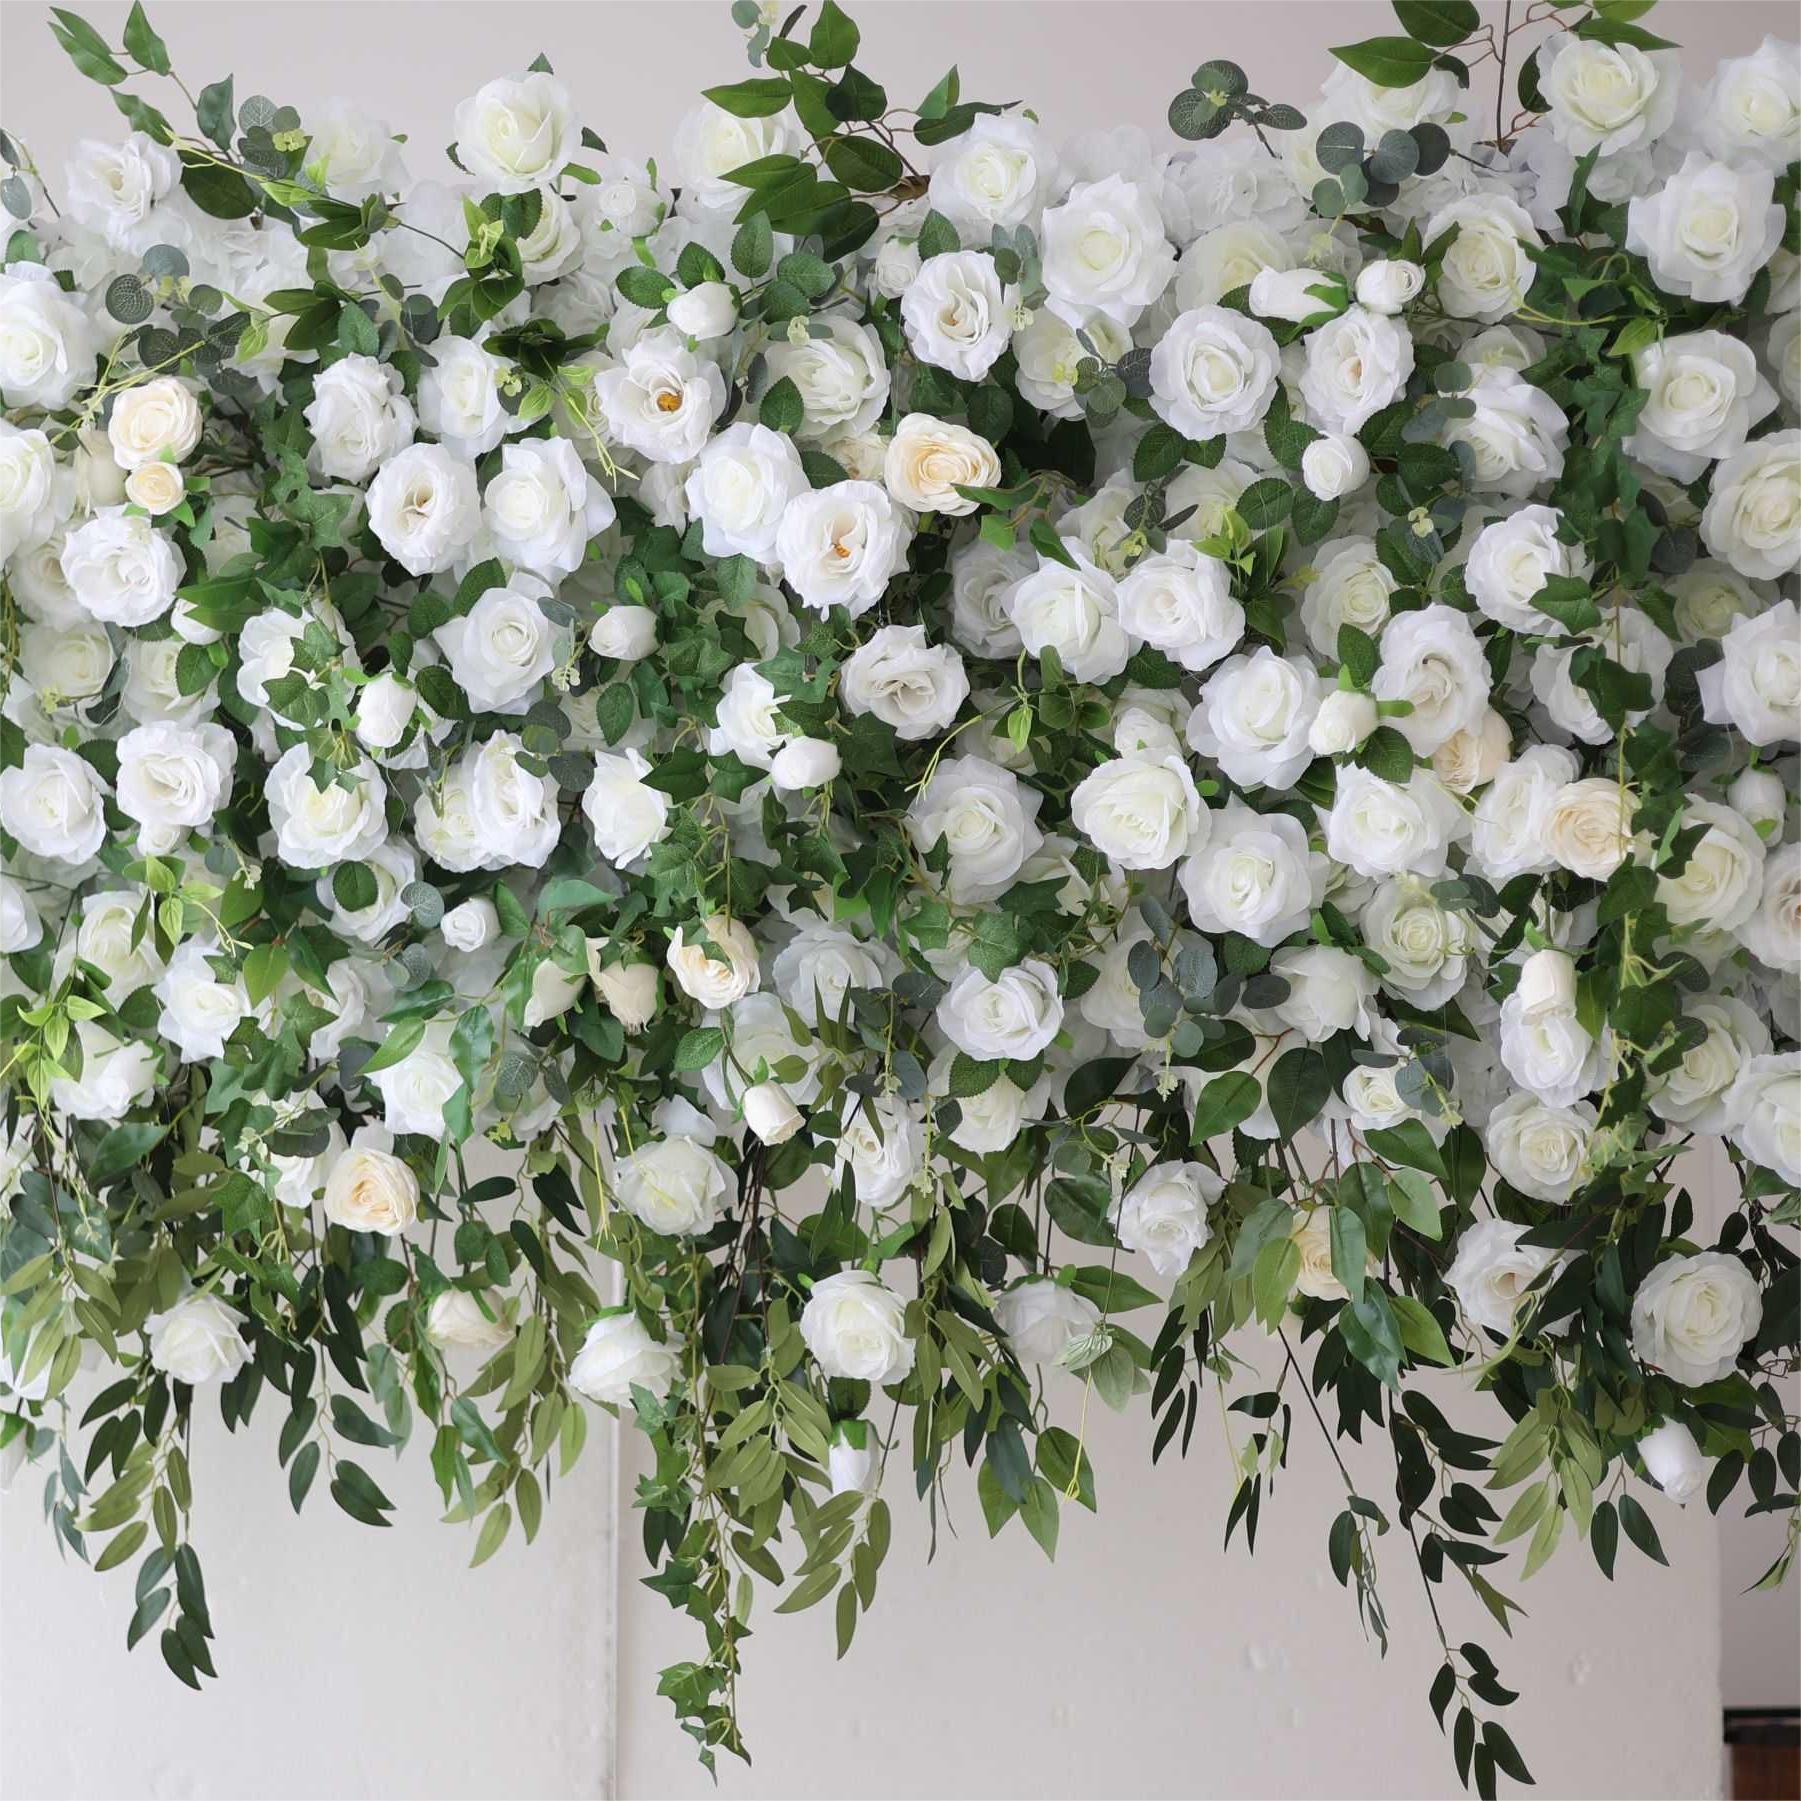 The white green florals flower wall looks vivid and lifelike.